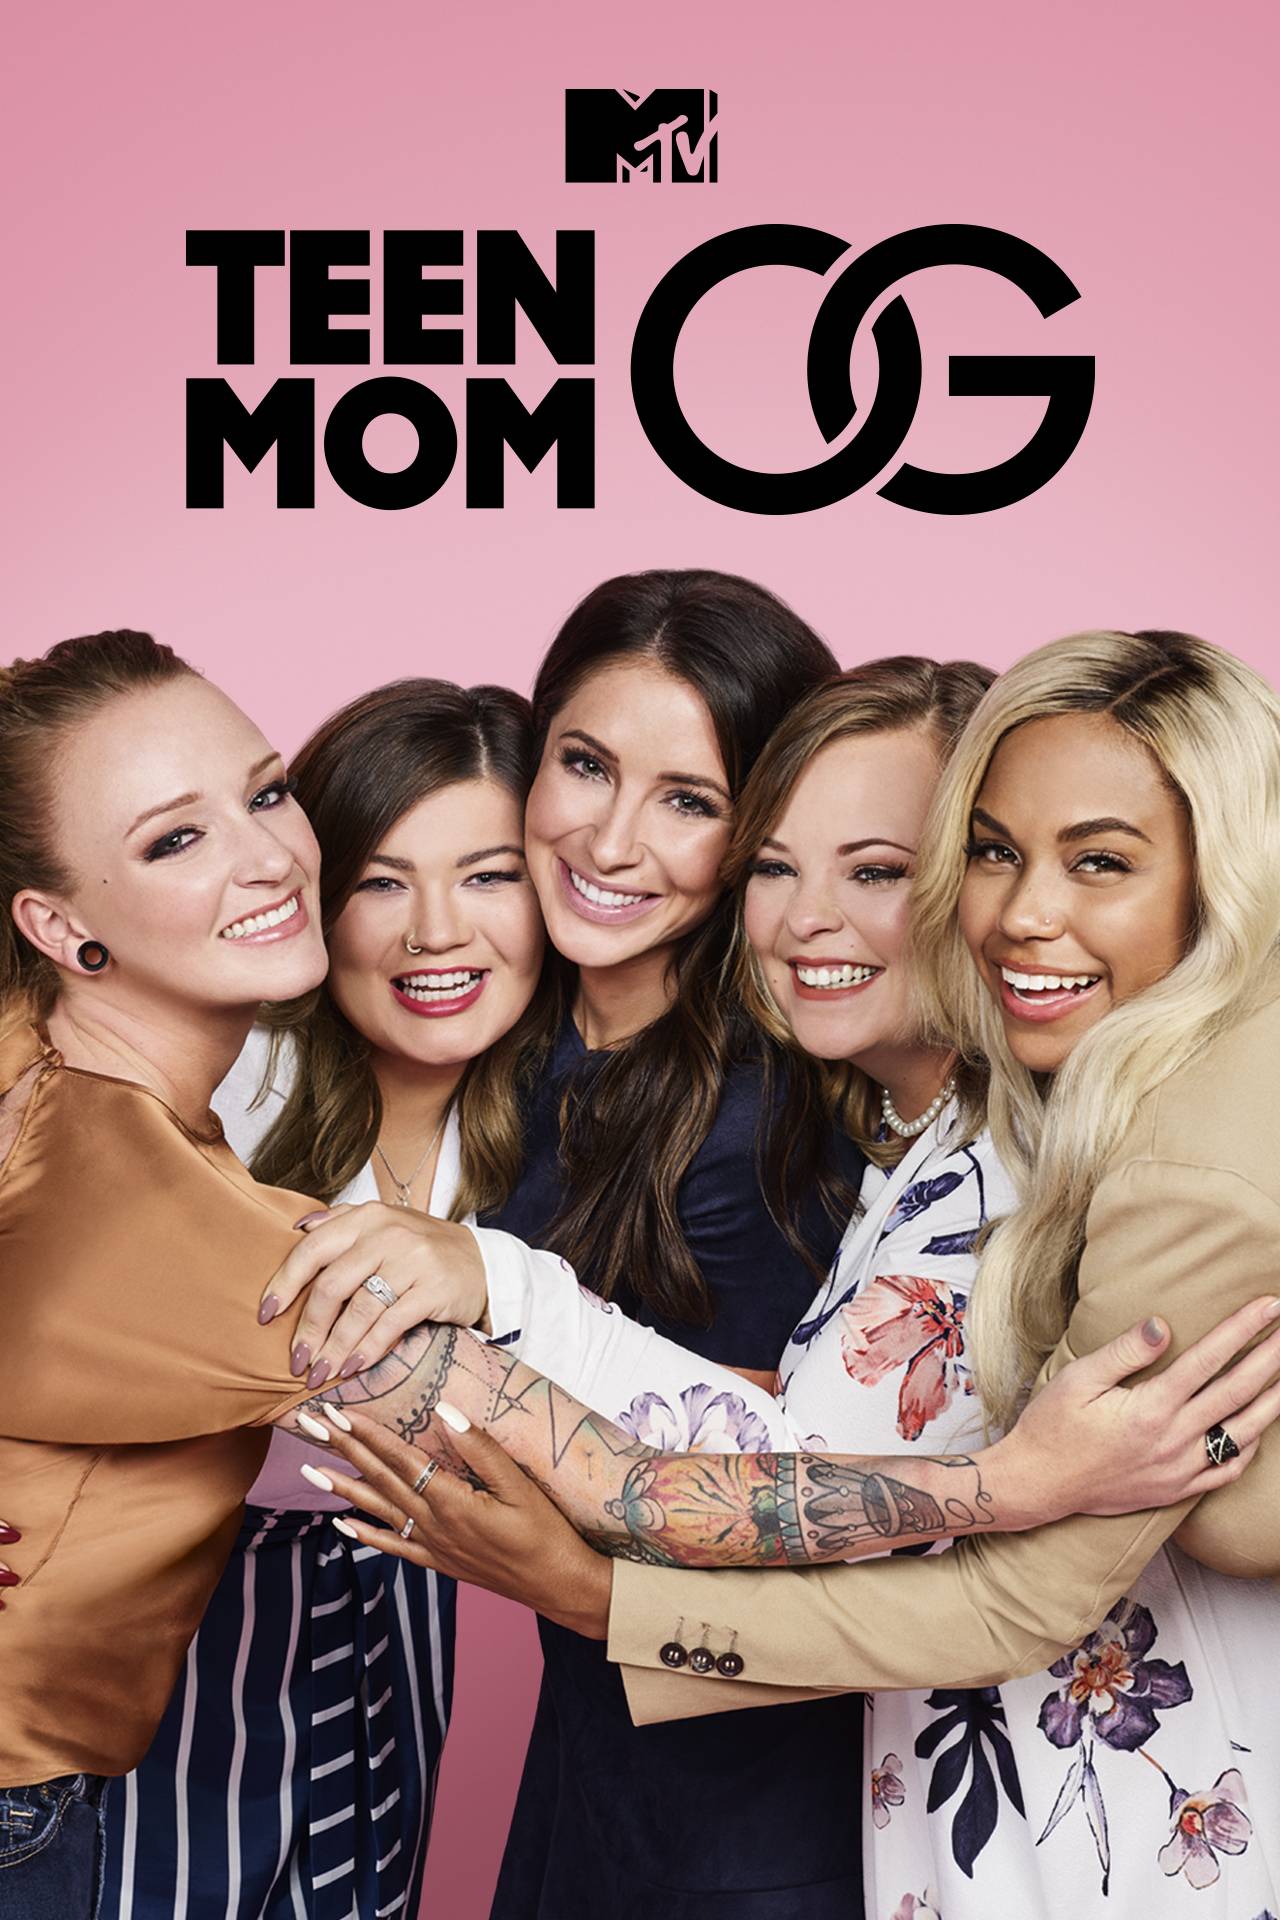 casey okane recommends teen mom 2 xxx pic